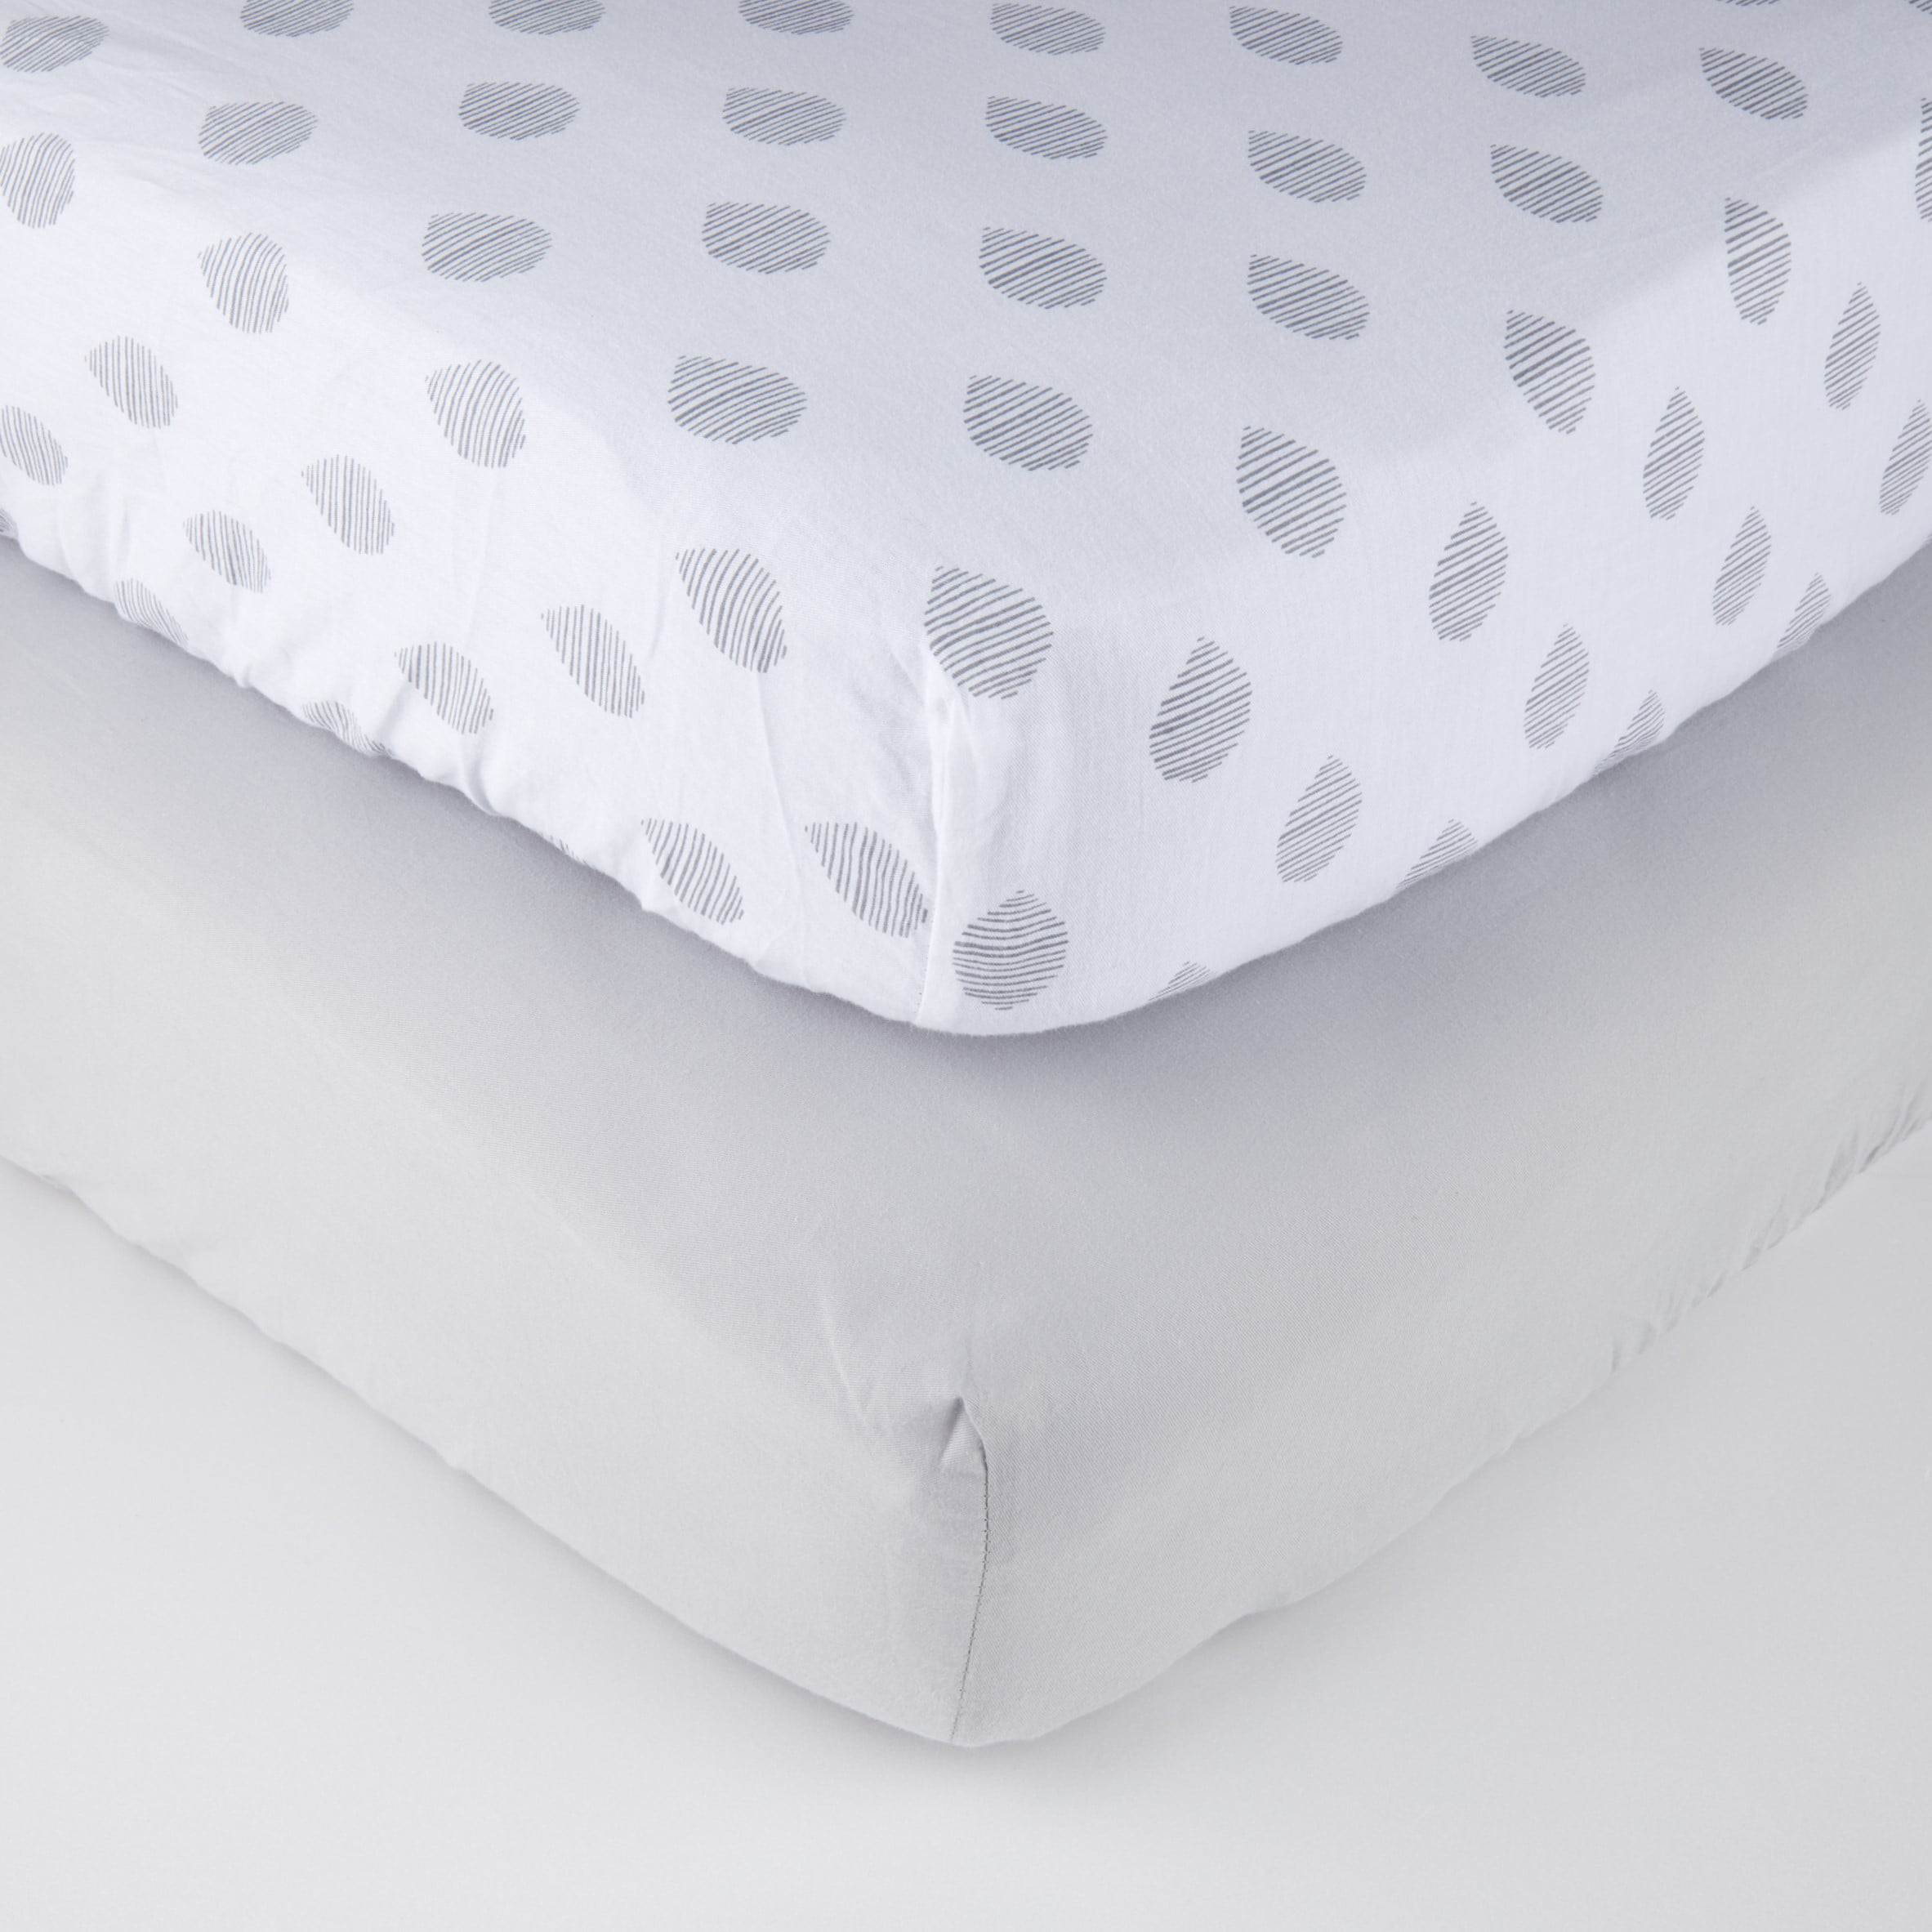 fitted crib sheets walmart